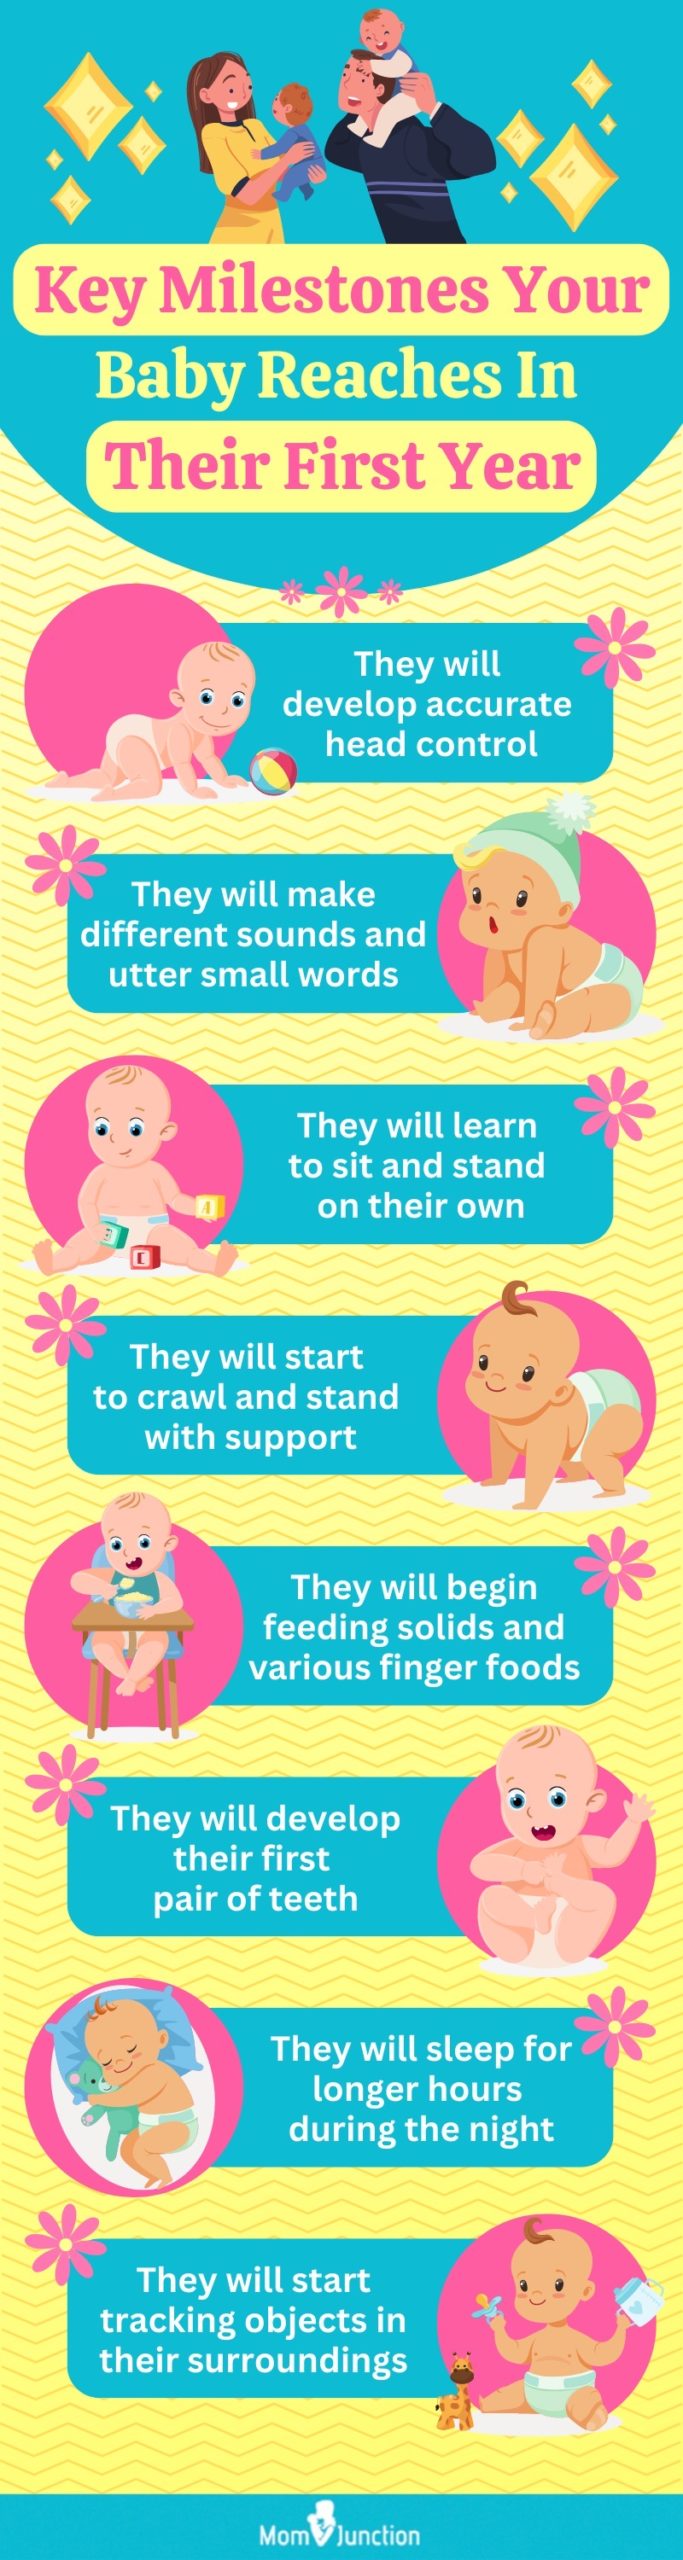 key milestones you baby reaches in their first year (infographic)